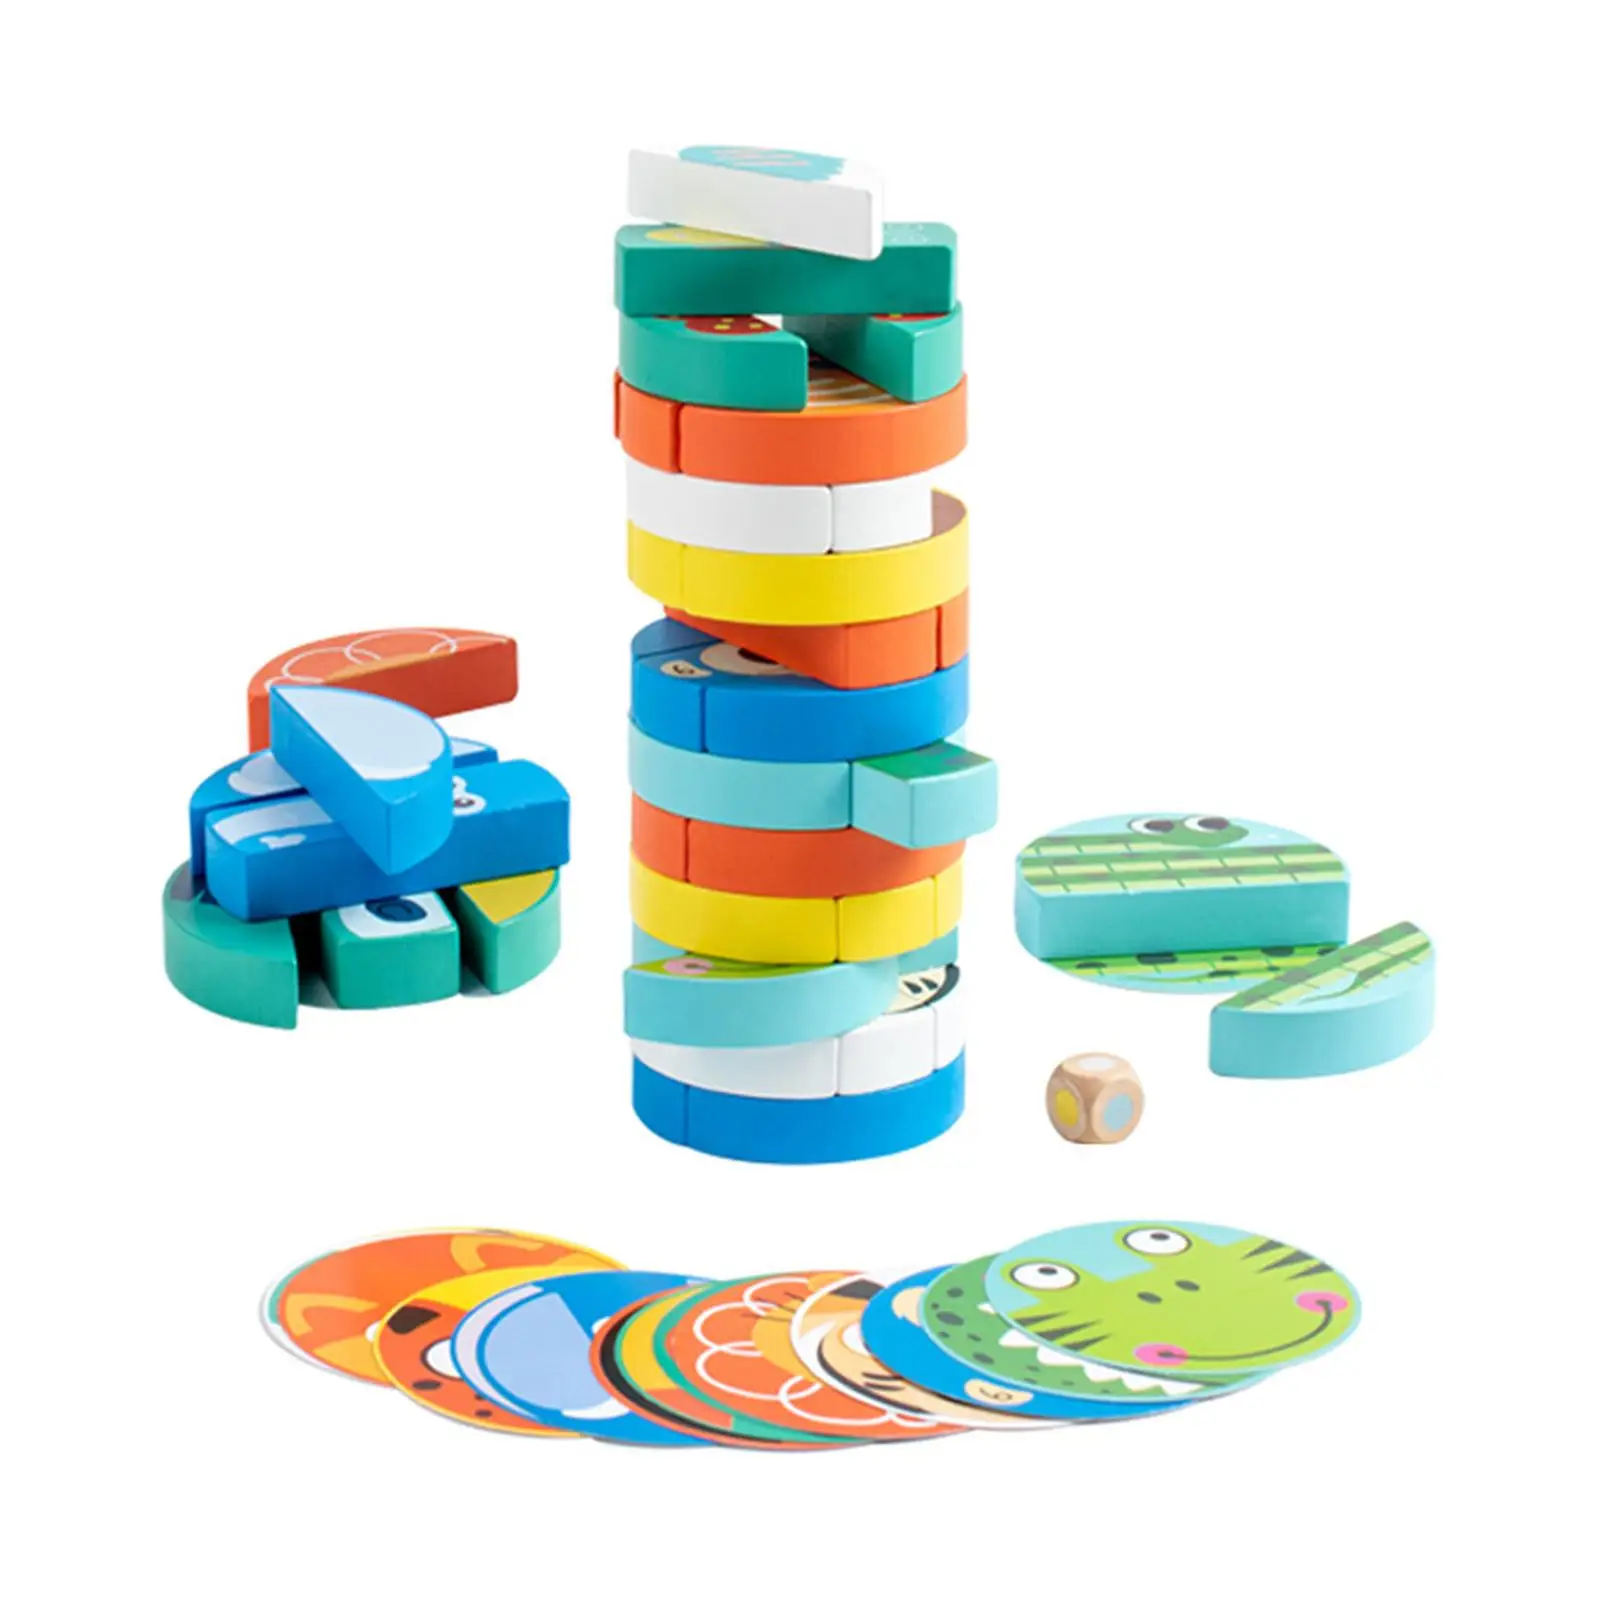 Tumble Towers Game Cute Wooden Blocks Stacking Game for Festival Preschool